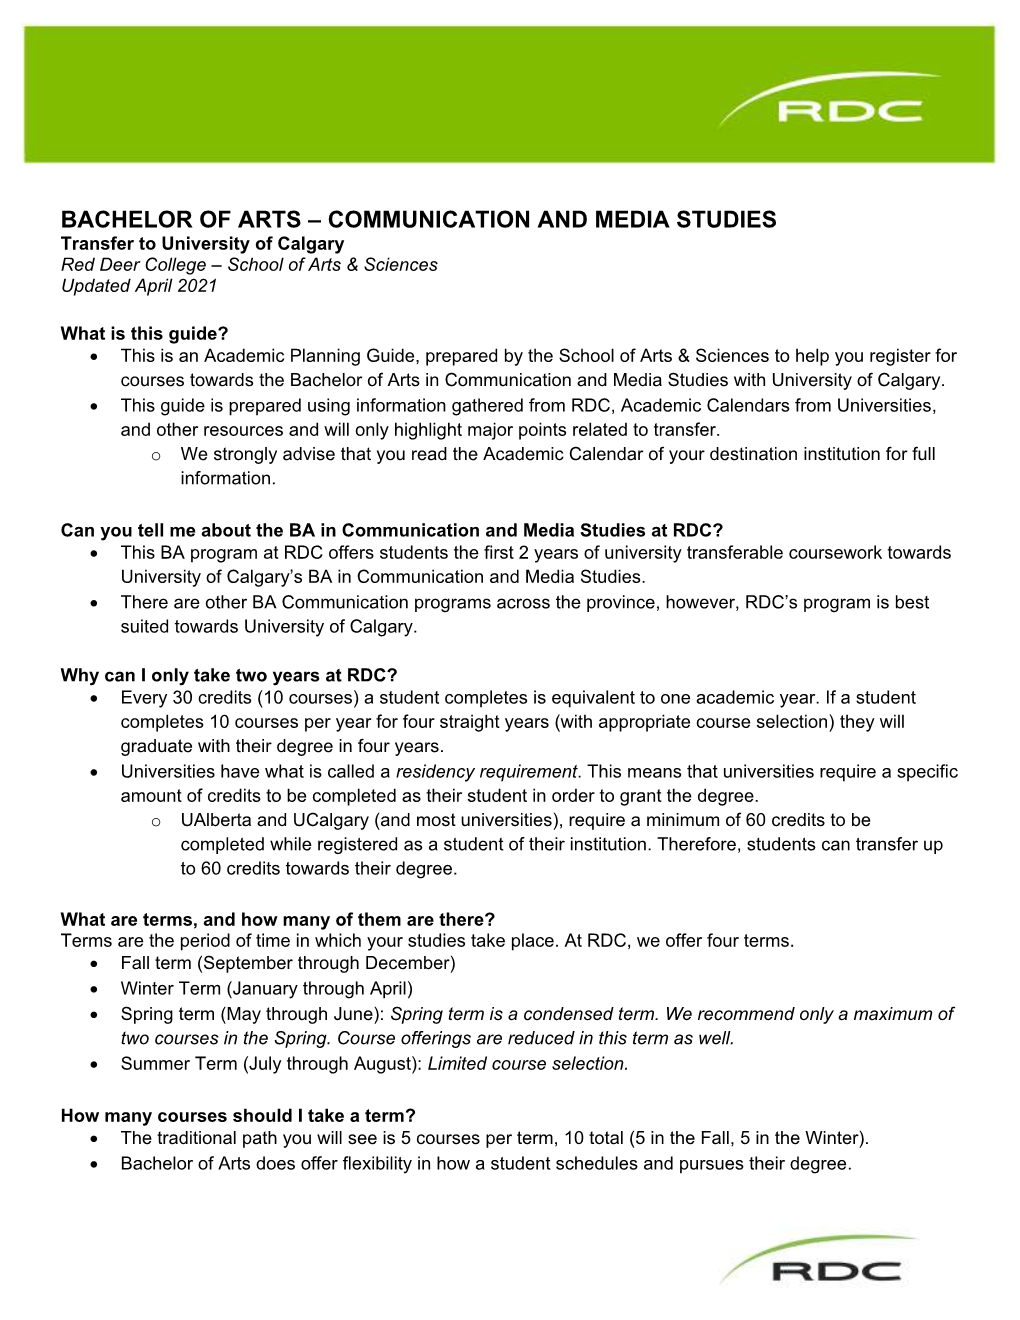 BACHELOR of ARTS – COMMUNICATION and MEDIA STUDIES Transfer to University of Calgary Red Deer College – School of Arts & Sciences Updated April 2021